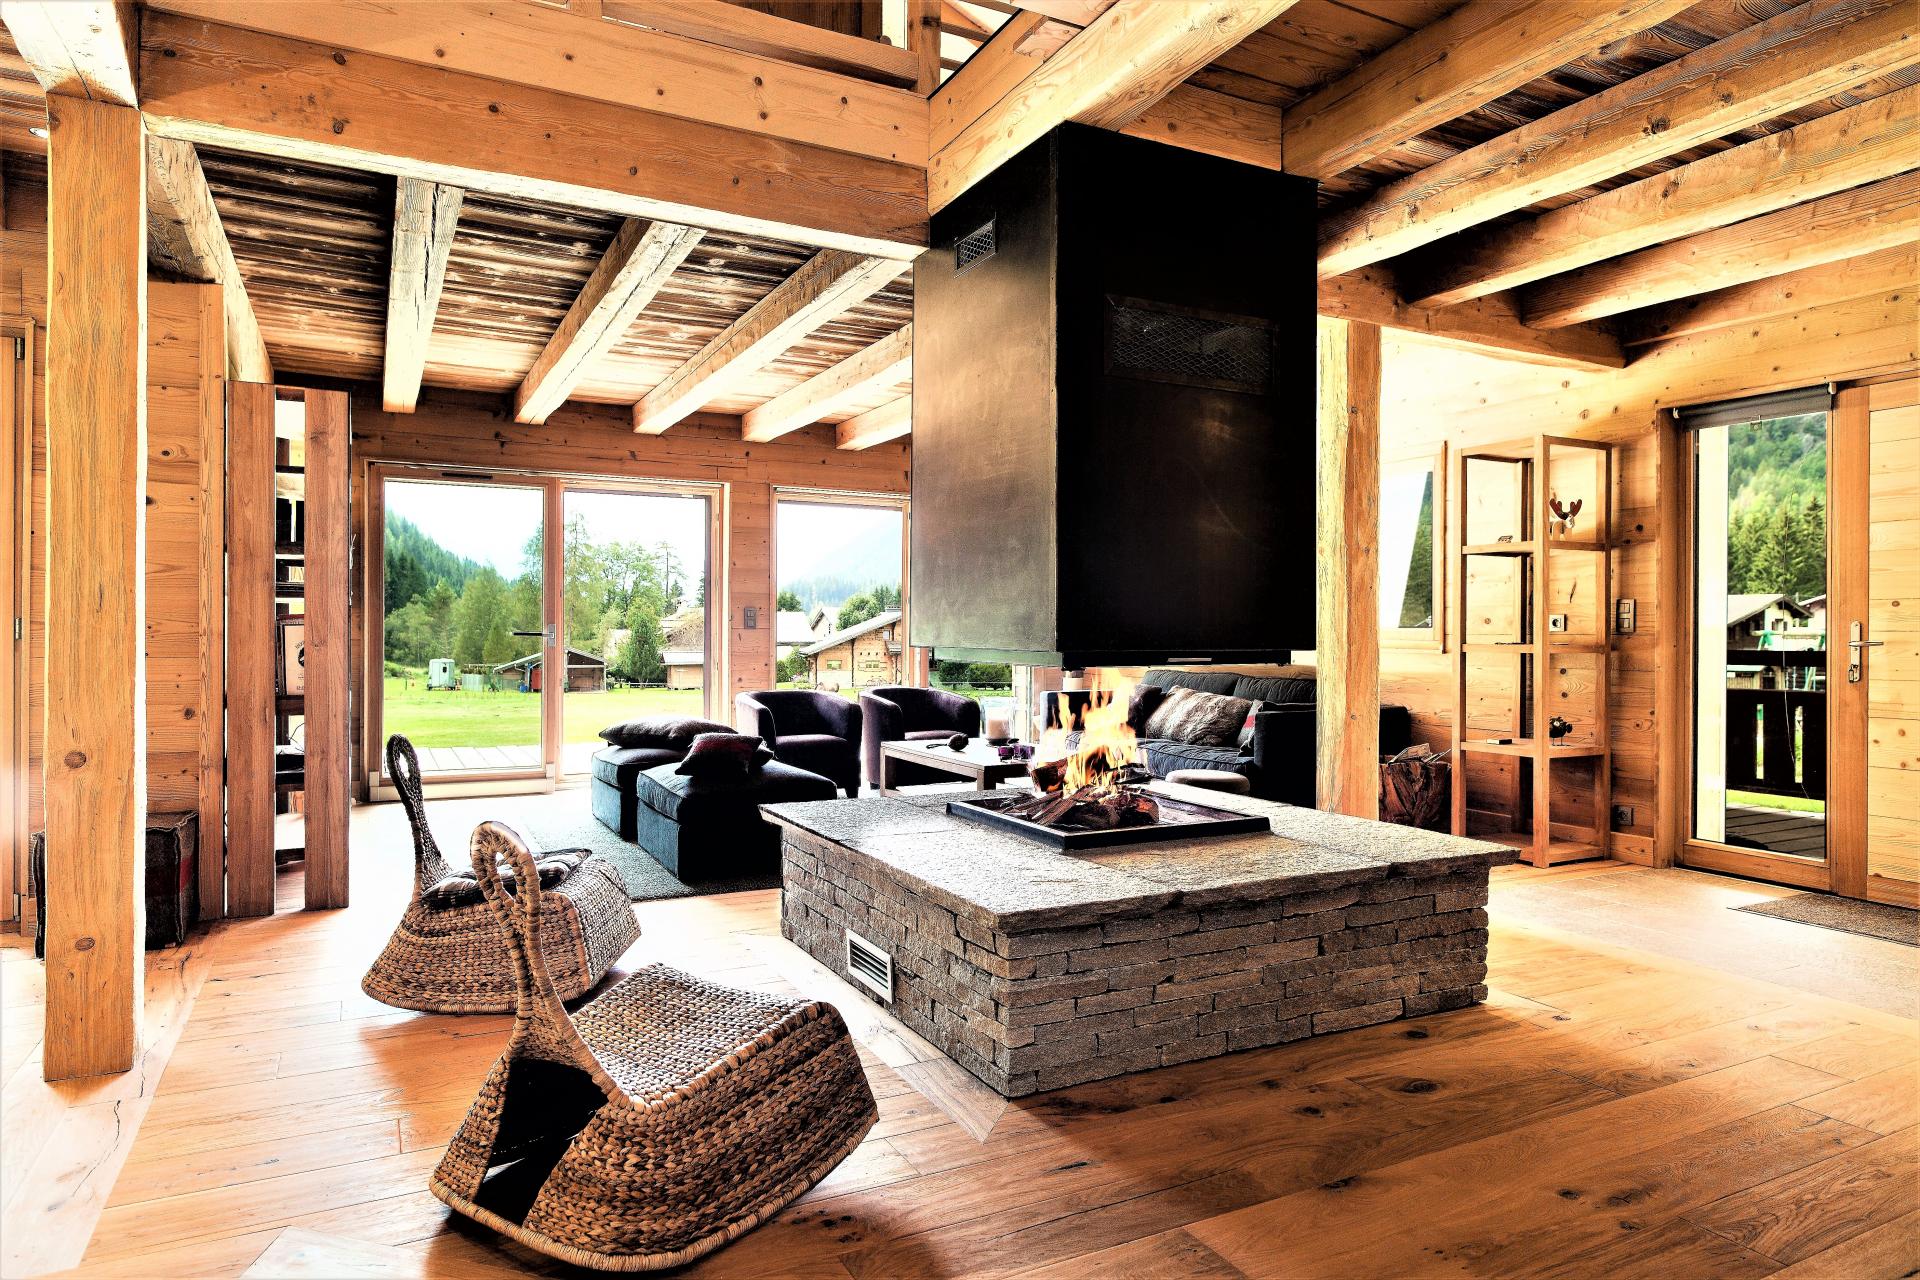 THE FIREPLACE AND THE LOUNGE IN CHALET DES GRANDS MONTETS